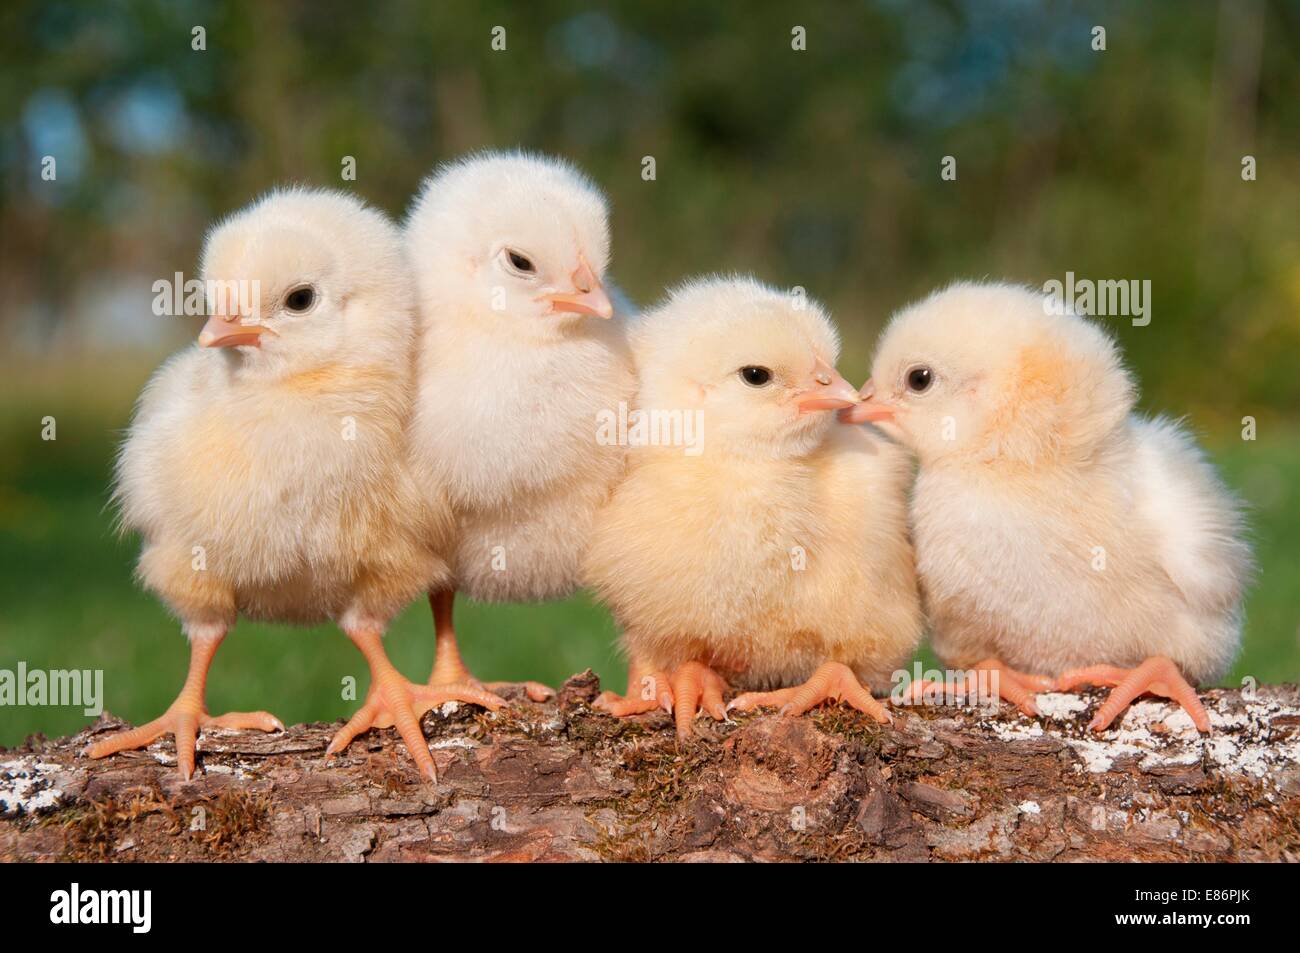 Four chicks on a log Stock Photo